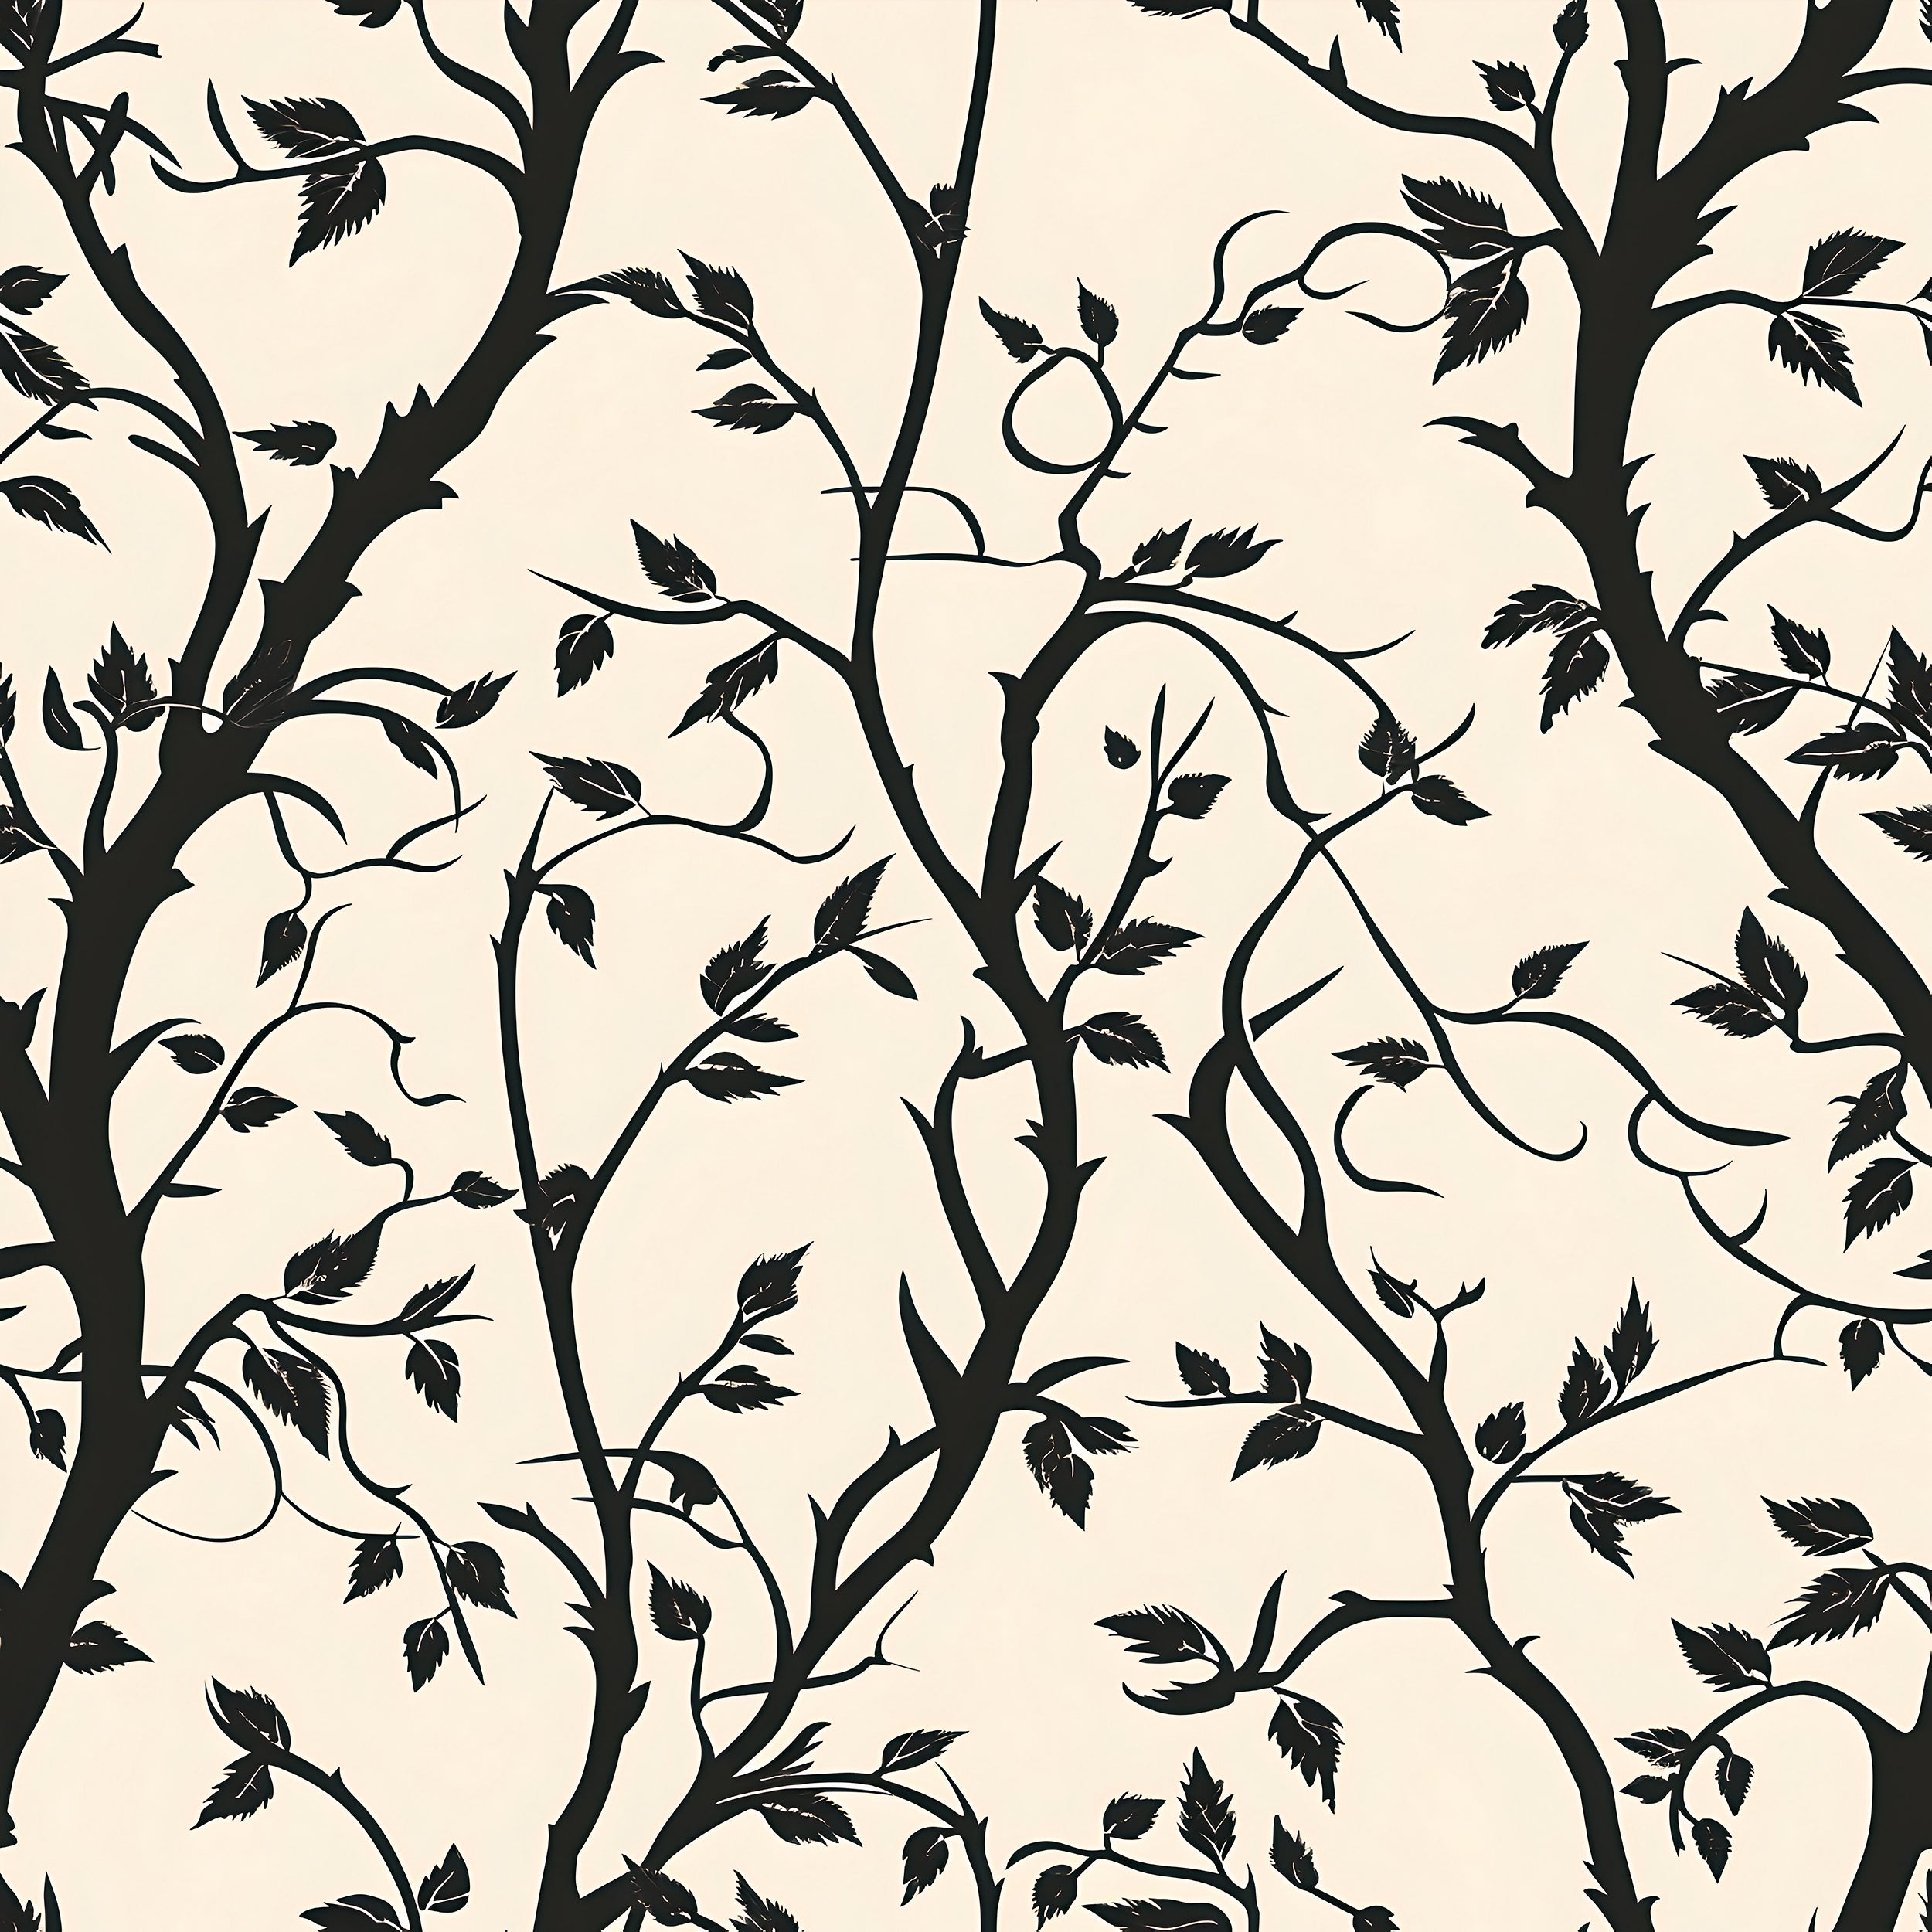 Removable tree branches wall decor Gothic-inspired botanical wallpaper